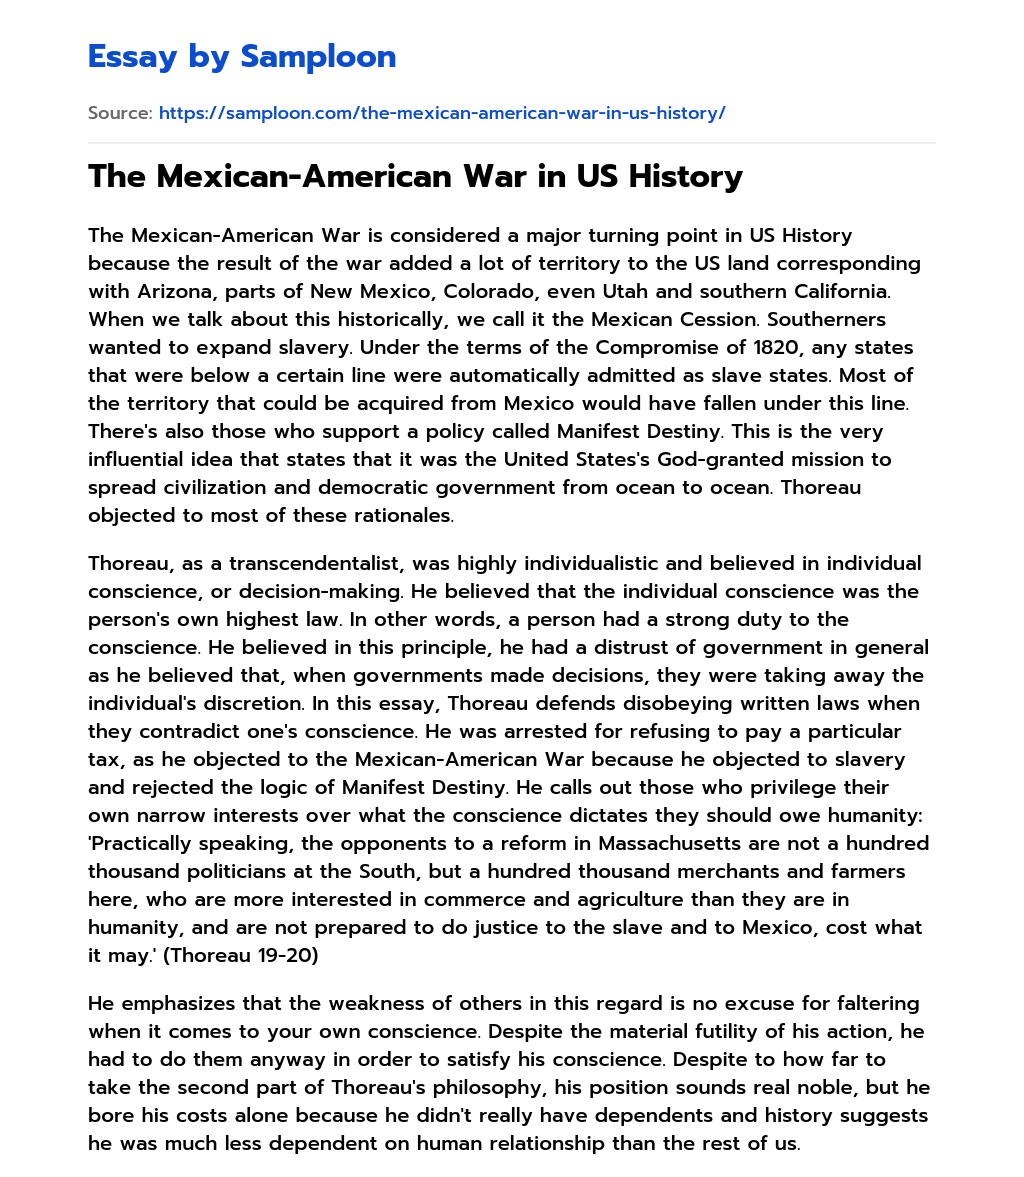 The Mexican-American War in US History essay